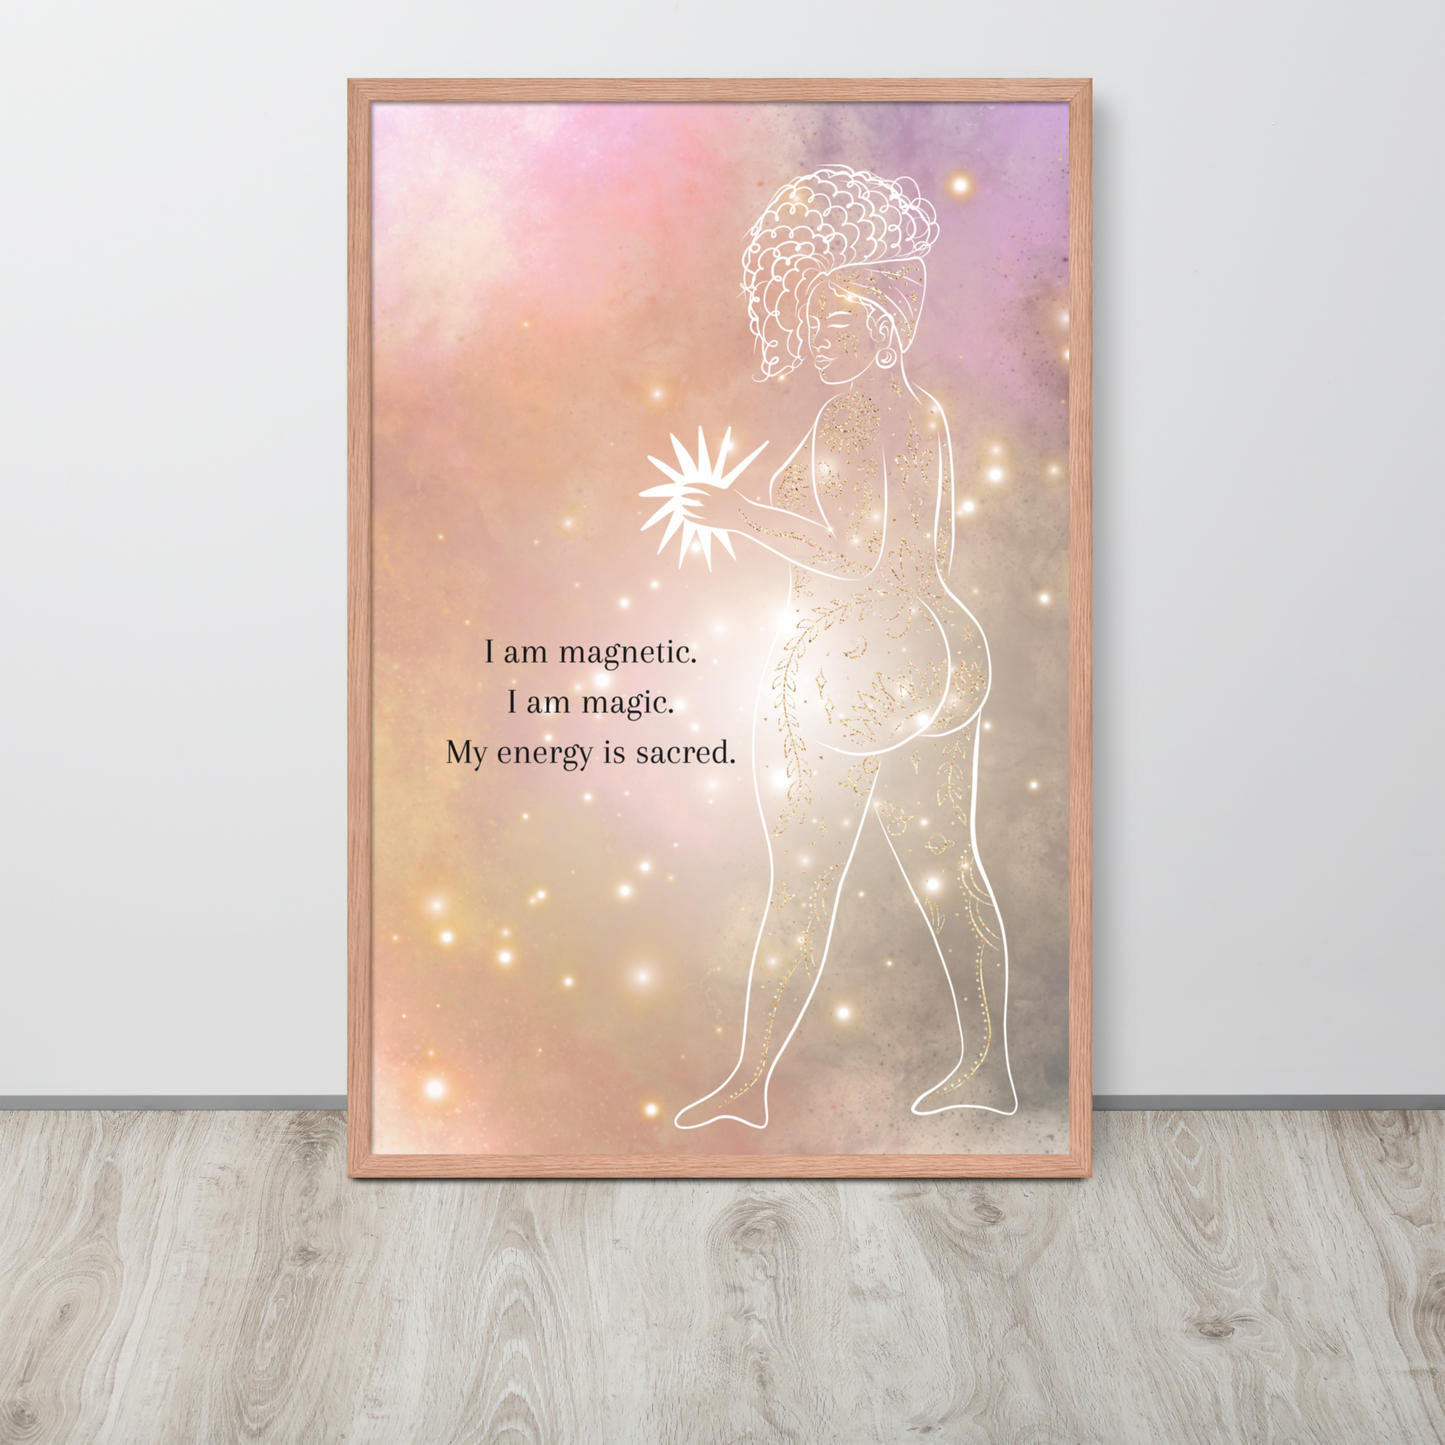 Printable wall art featuring Sacred Prayer Spiritual Decor: Empowering & Inspirational Wall Art for Boho Homes, perfect for creating a positive environment in your space.